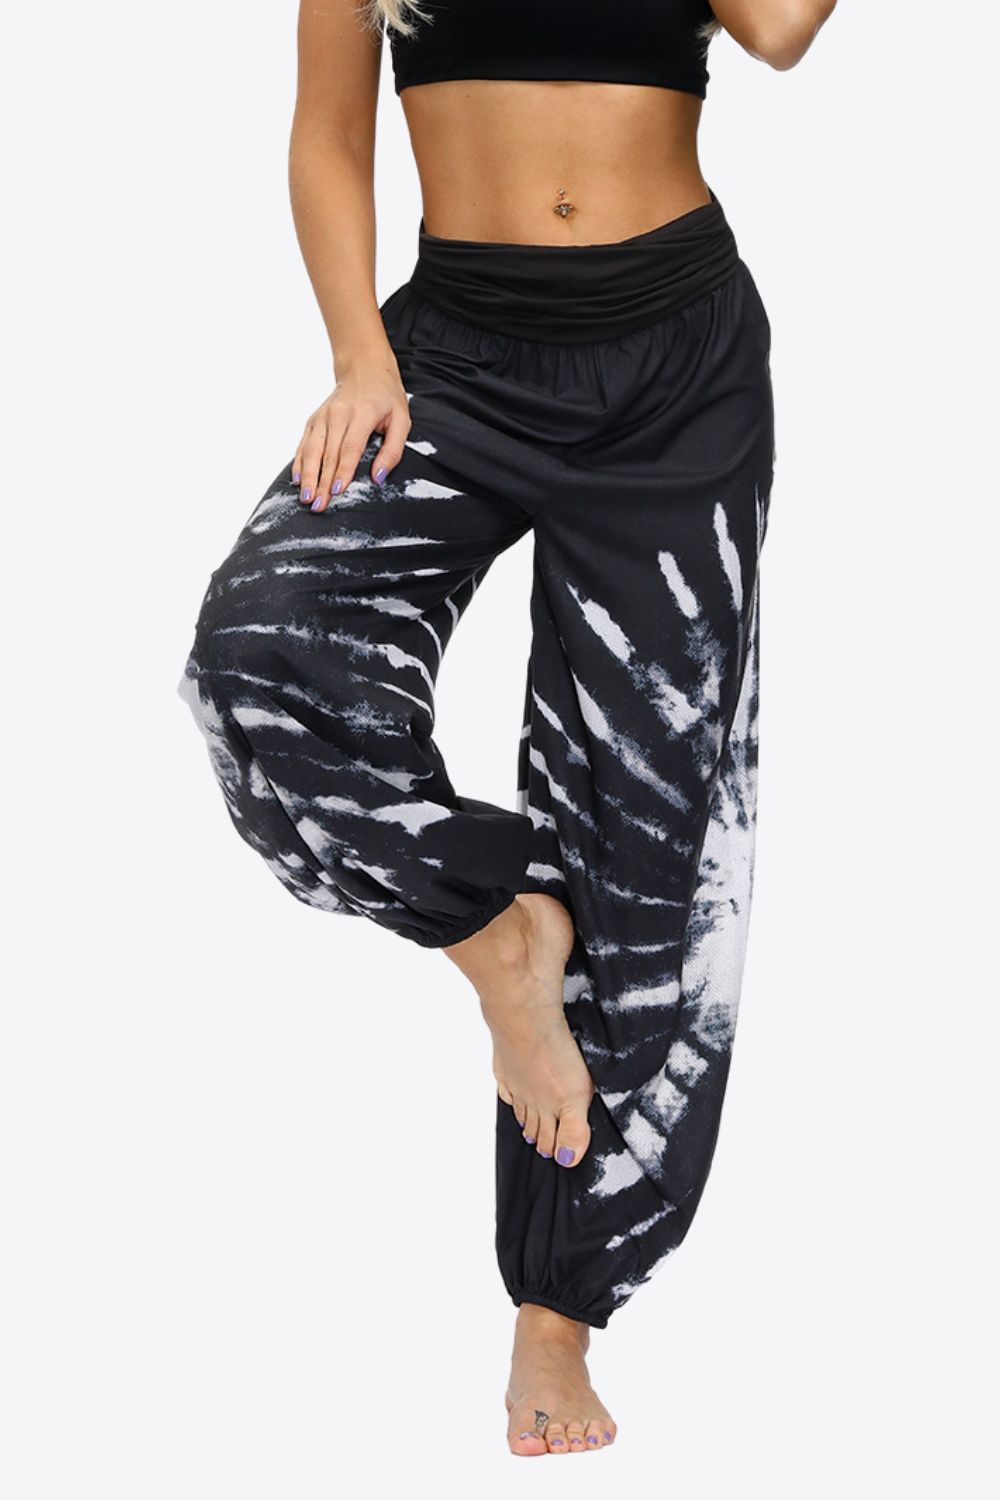 Exotic Style Printed Ruched Pants - Black / S - Bottoms - Pants - 1 - 2024